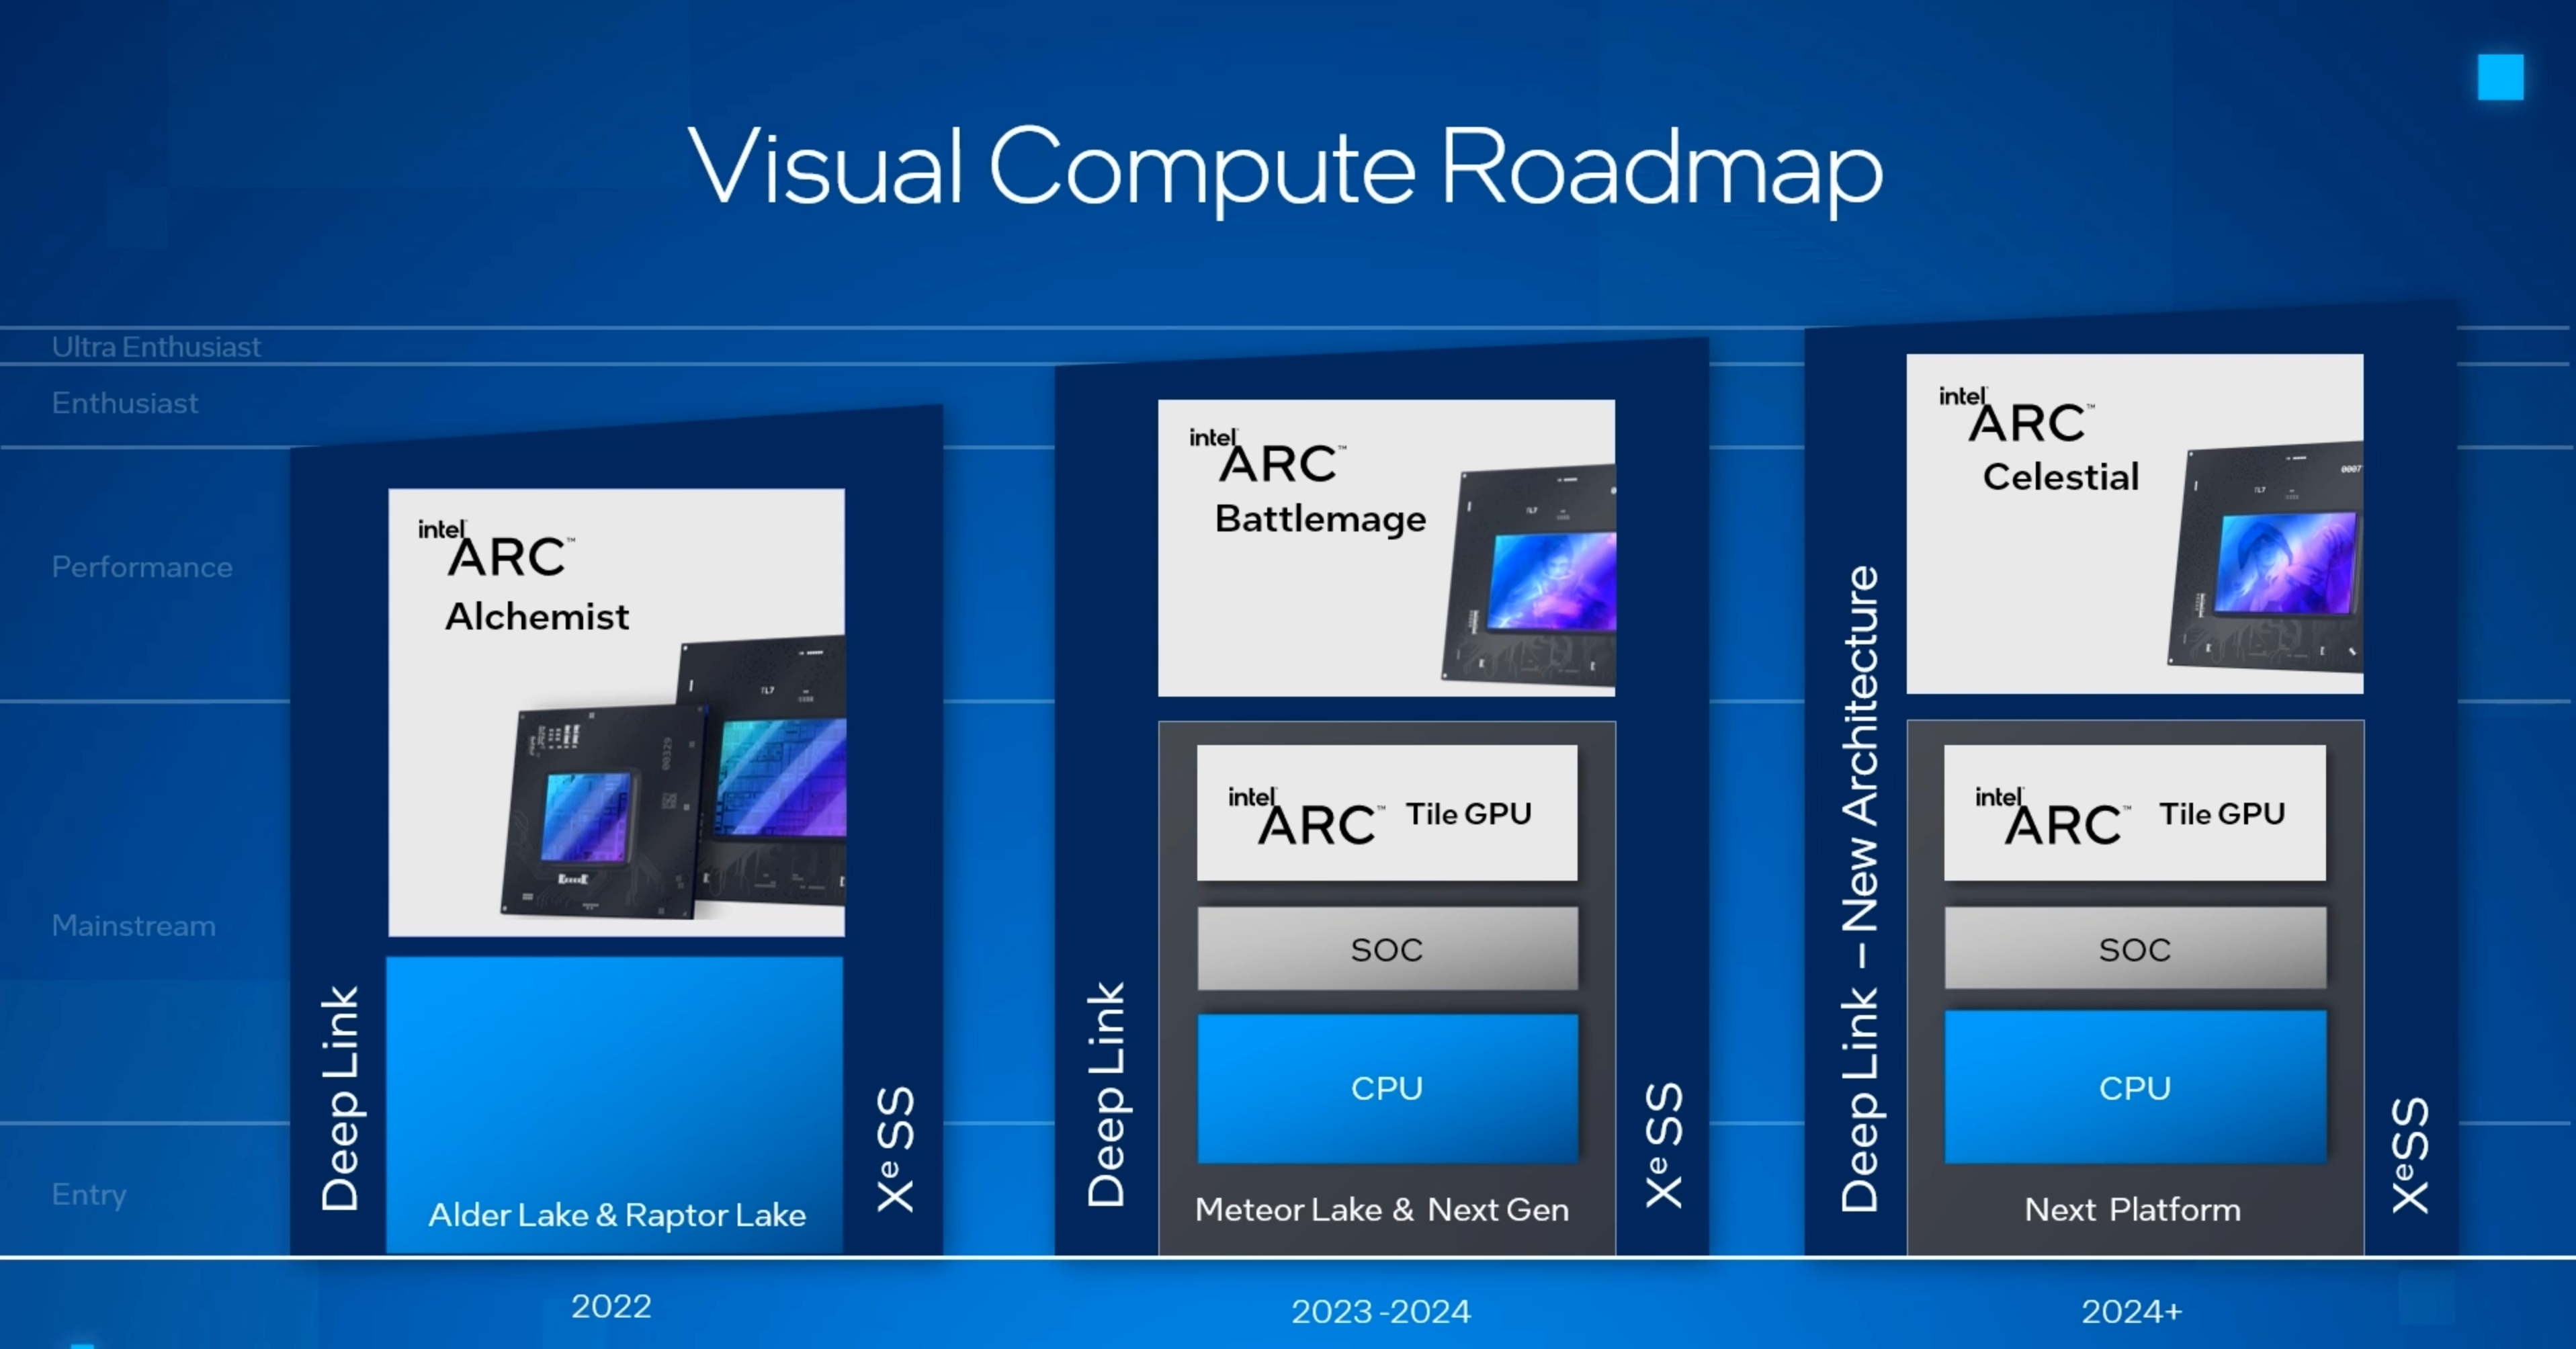 Intel visual compute roadmap with Arc GPUs noted with their release windows